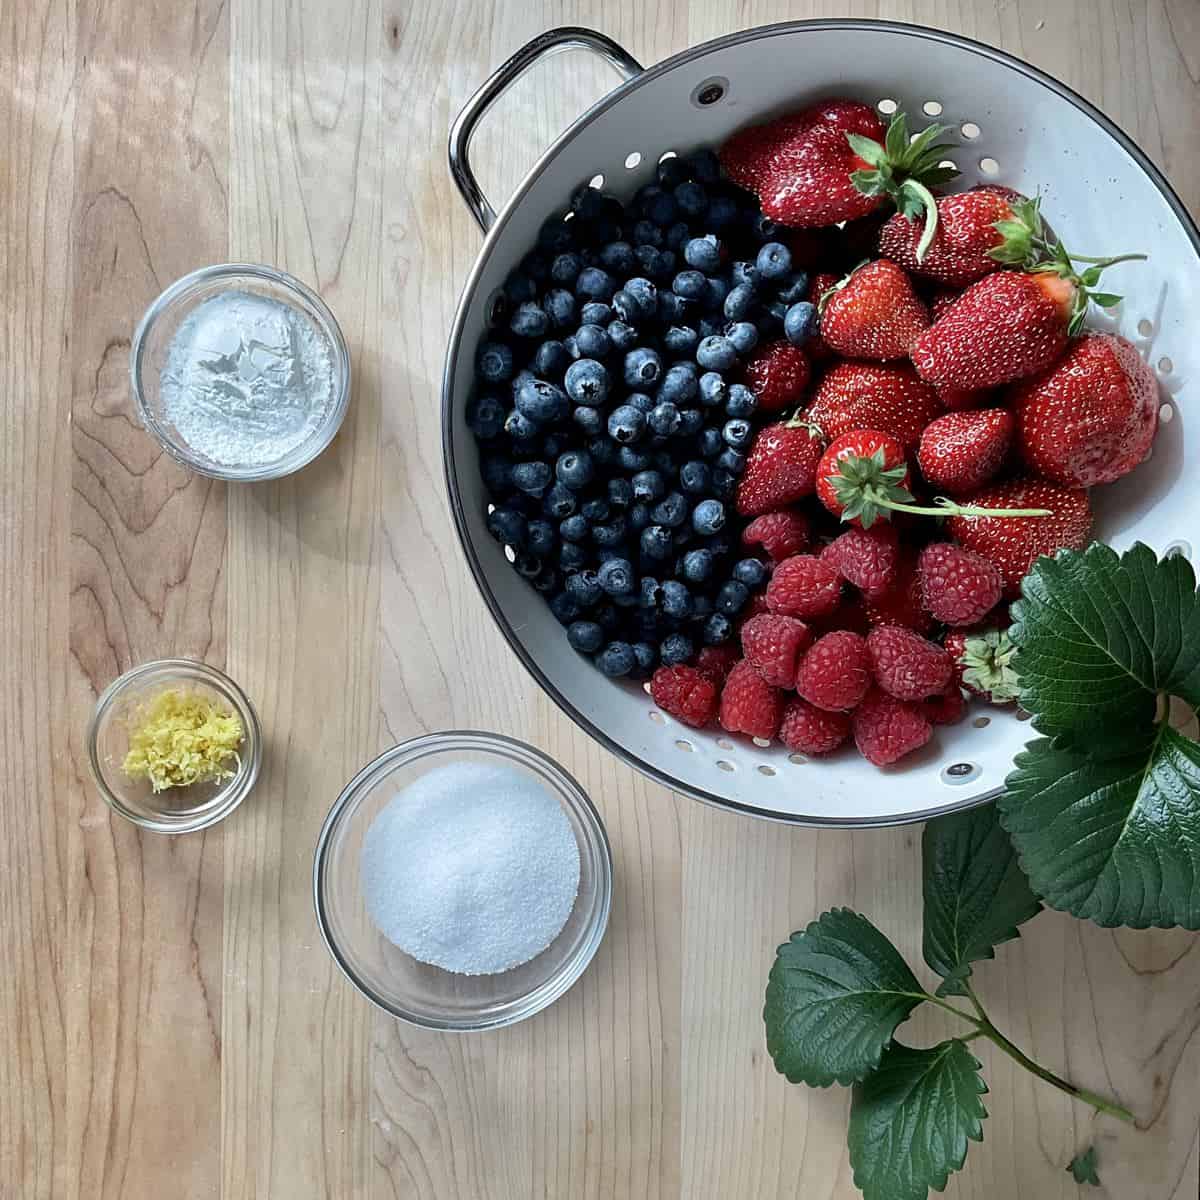 Ingredients to make a berry filling for a crostata on a wooden table.